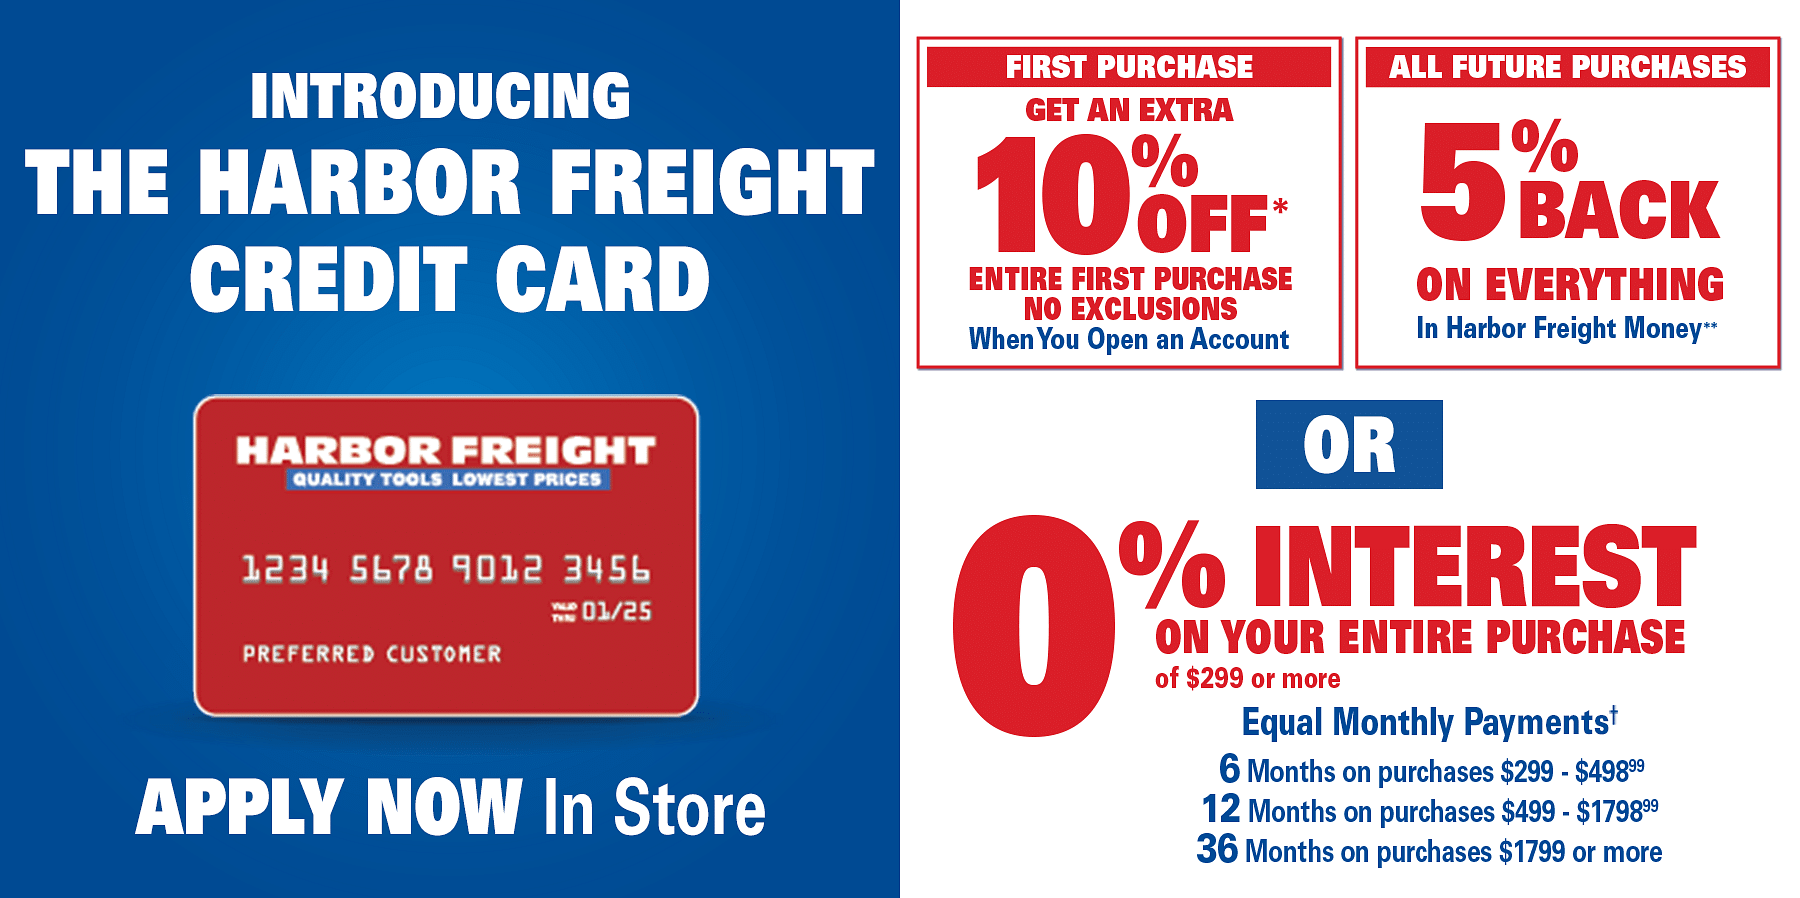 Harbor Freight Coupons Free |Jan 2021: FREE Gift Card + Up To 85% Off